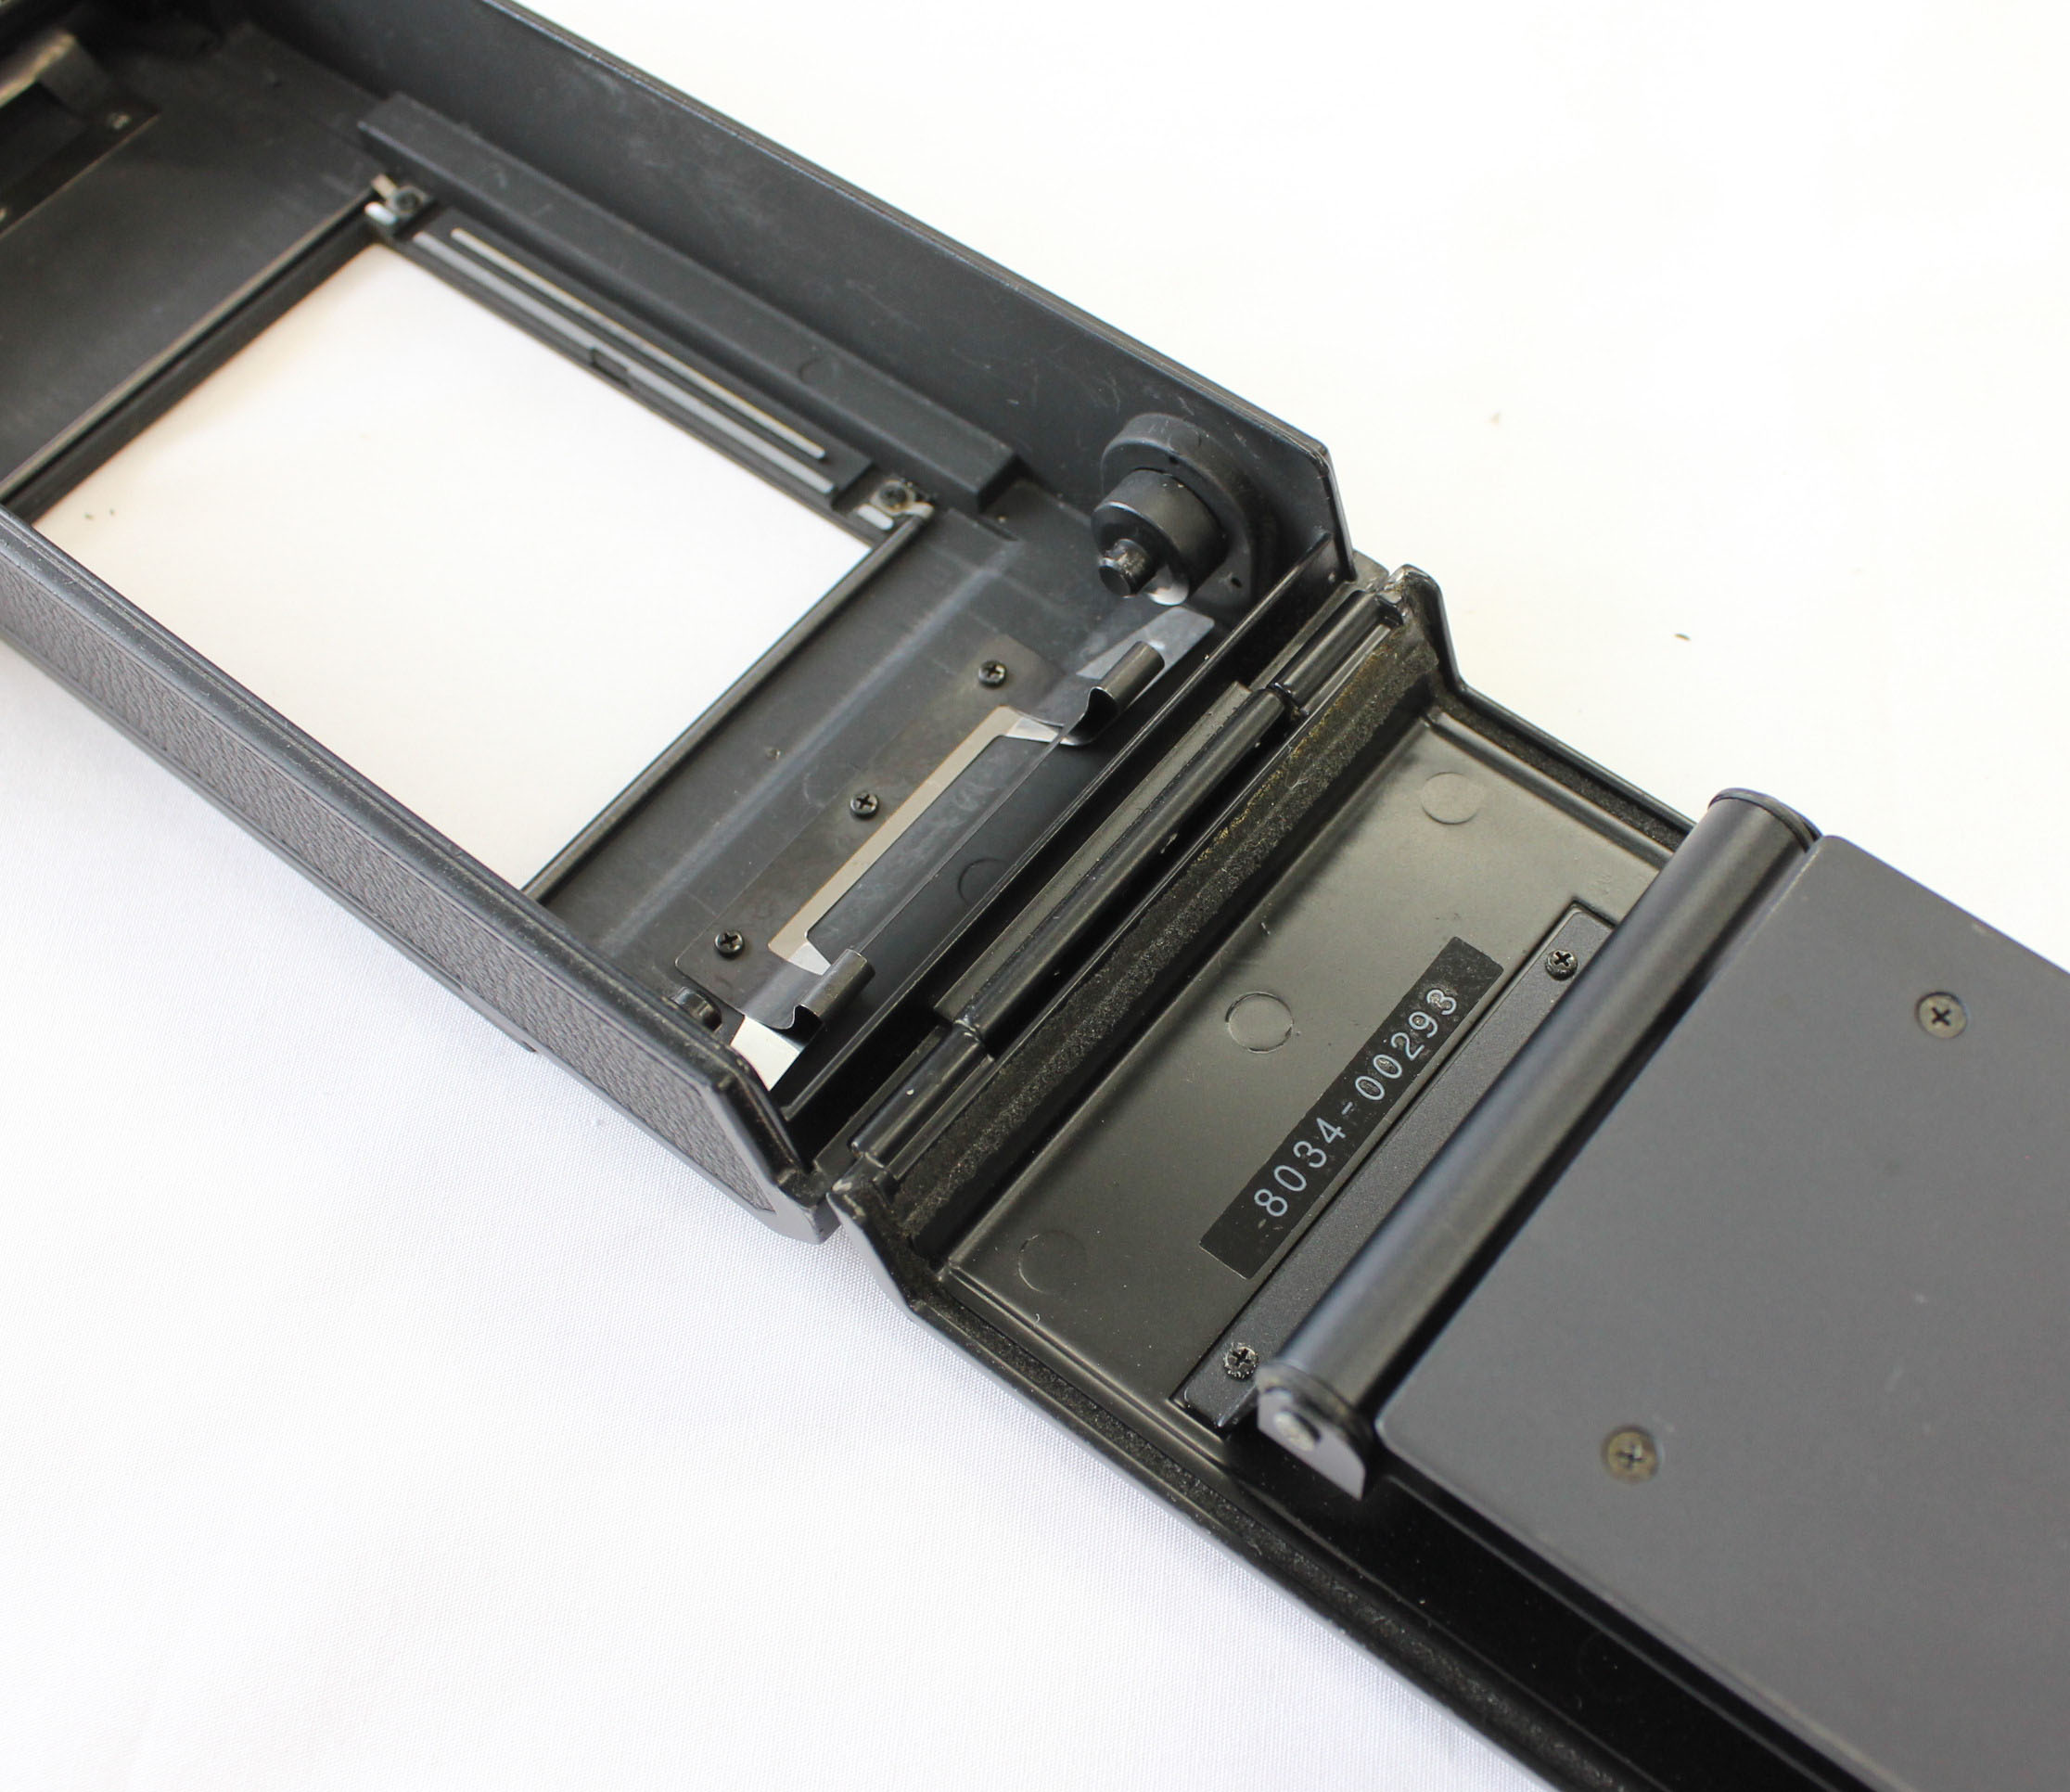 TOYO Roll Film Holder Back 69 6x9 No.8034 RFH69 for Large Format Camera from Japan Photo 6